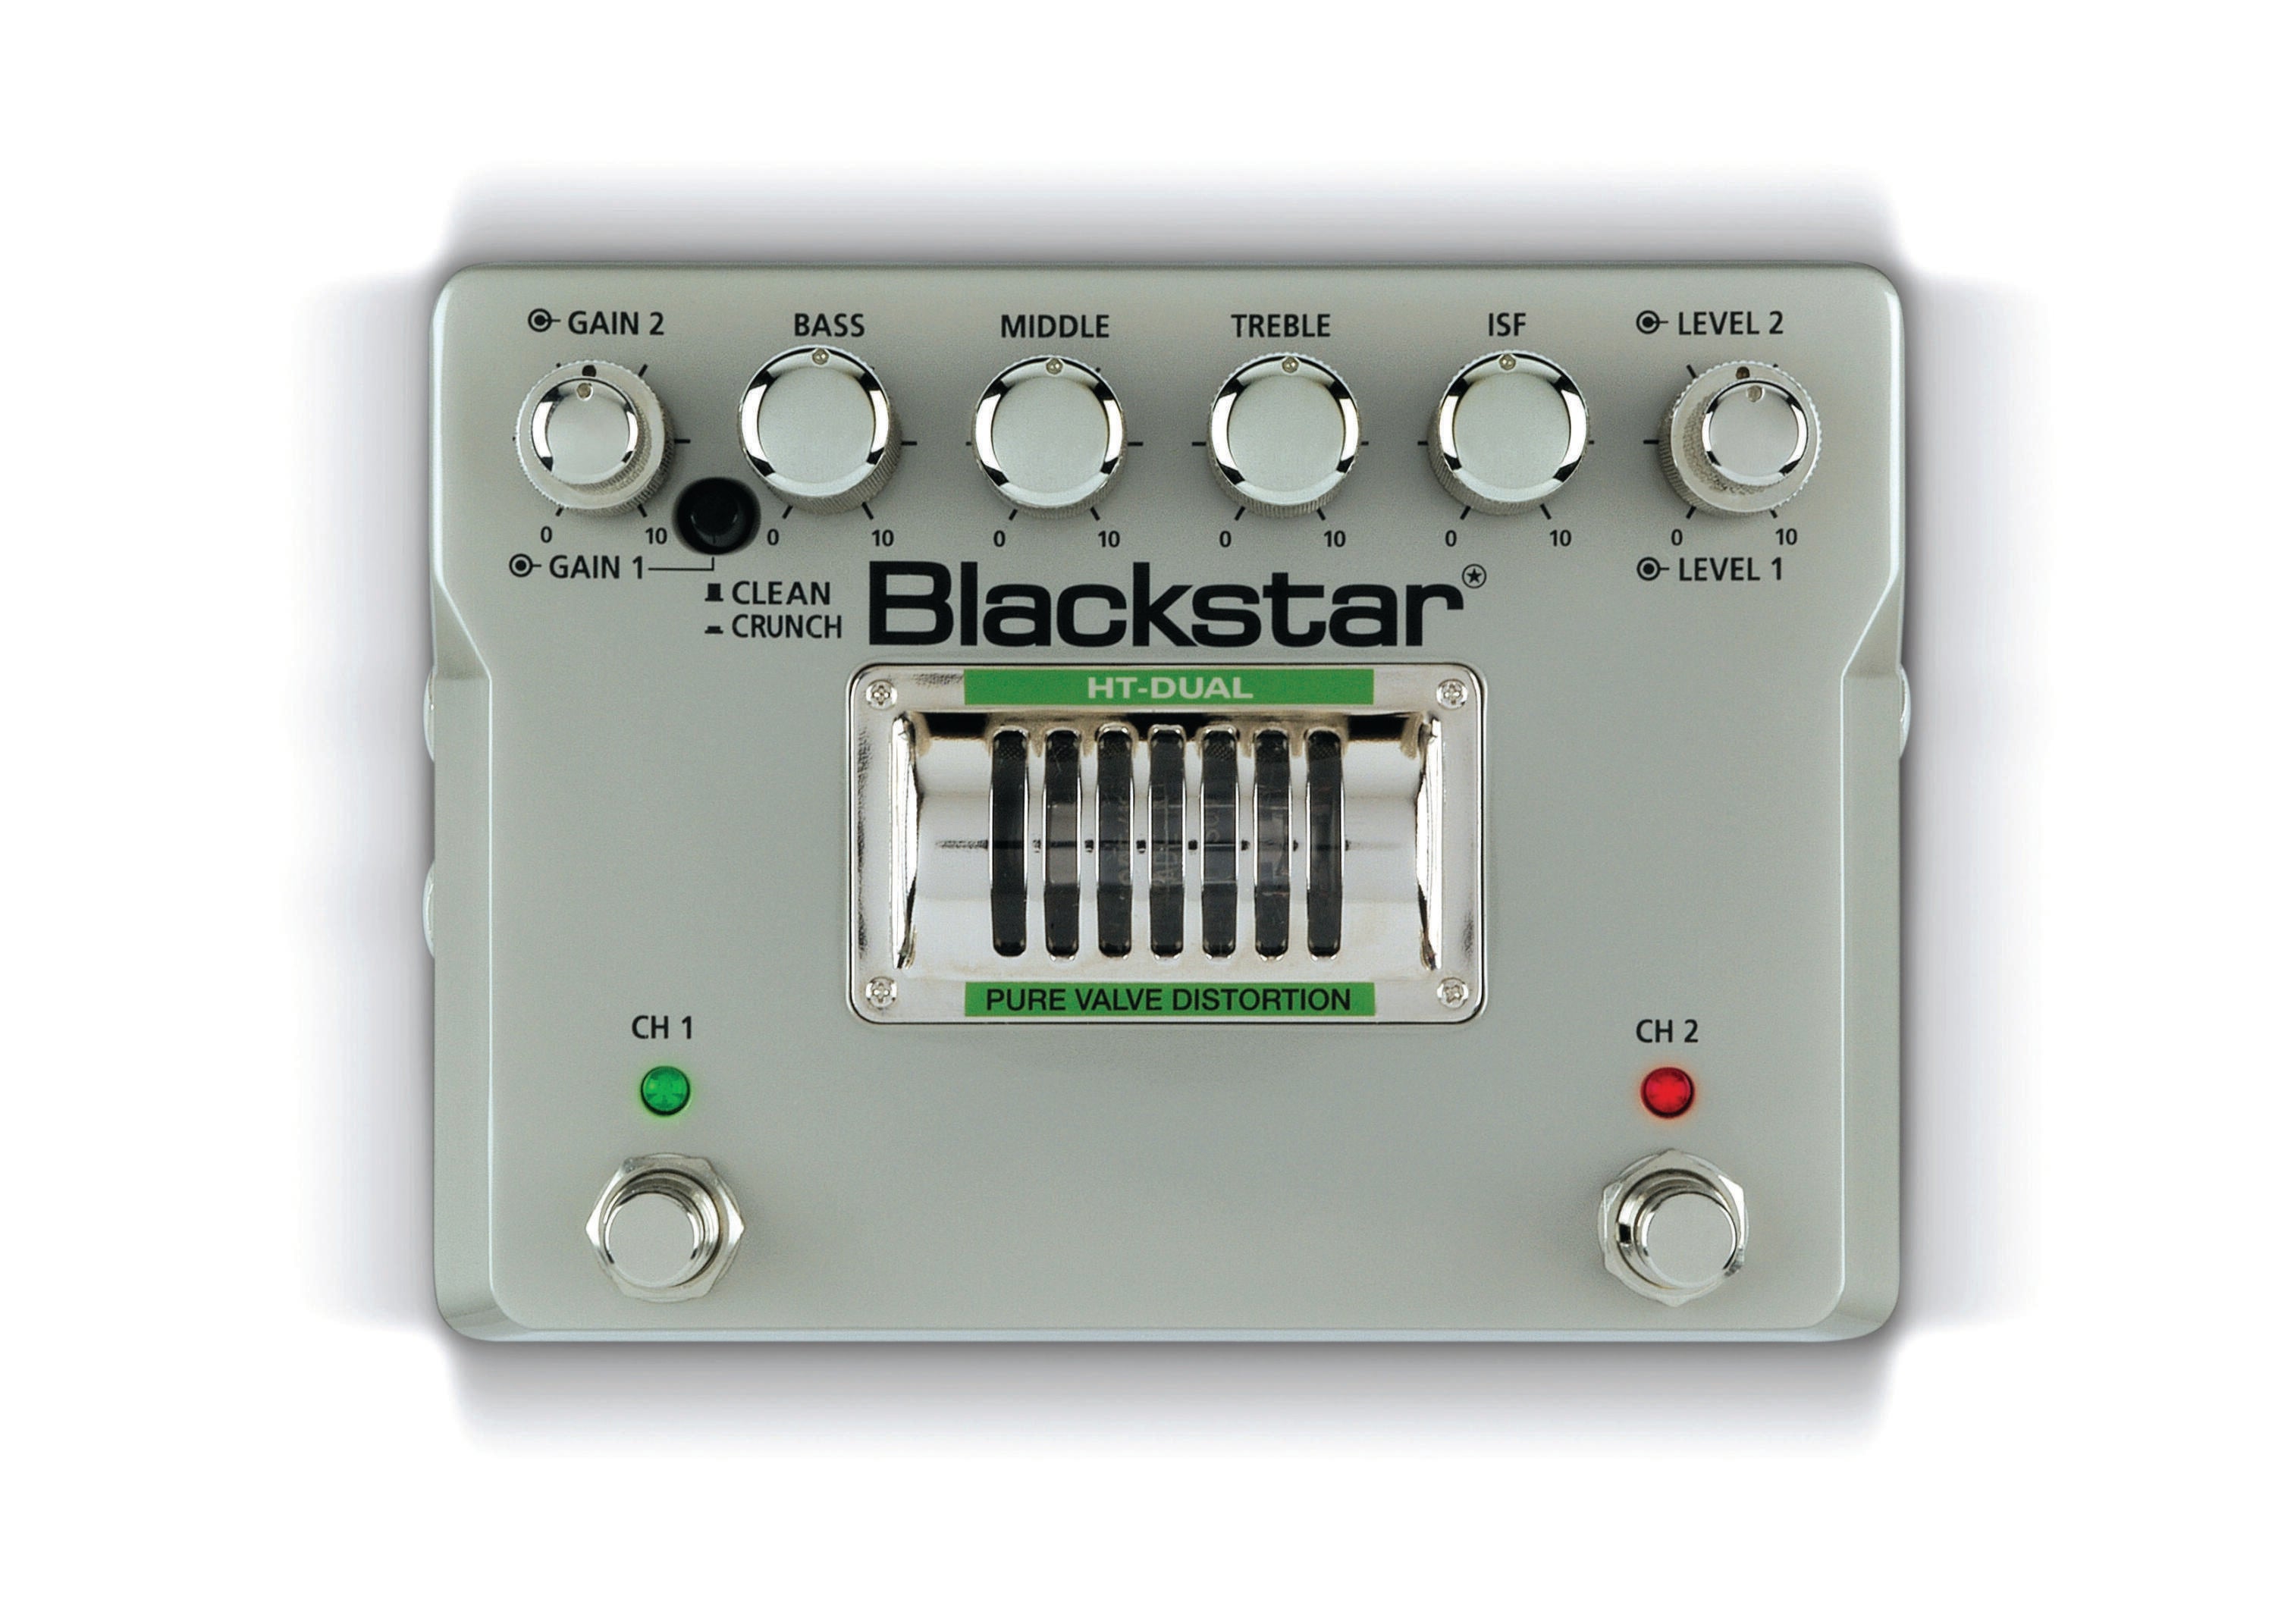 Blackstar HT-DUAL 2-Channel Tube Distortion Pedal | Sweetwater